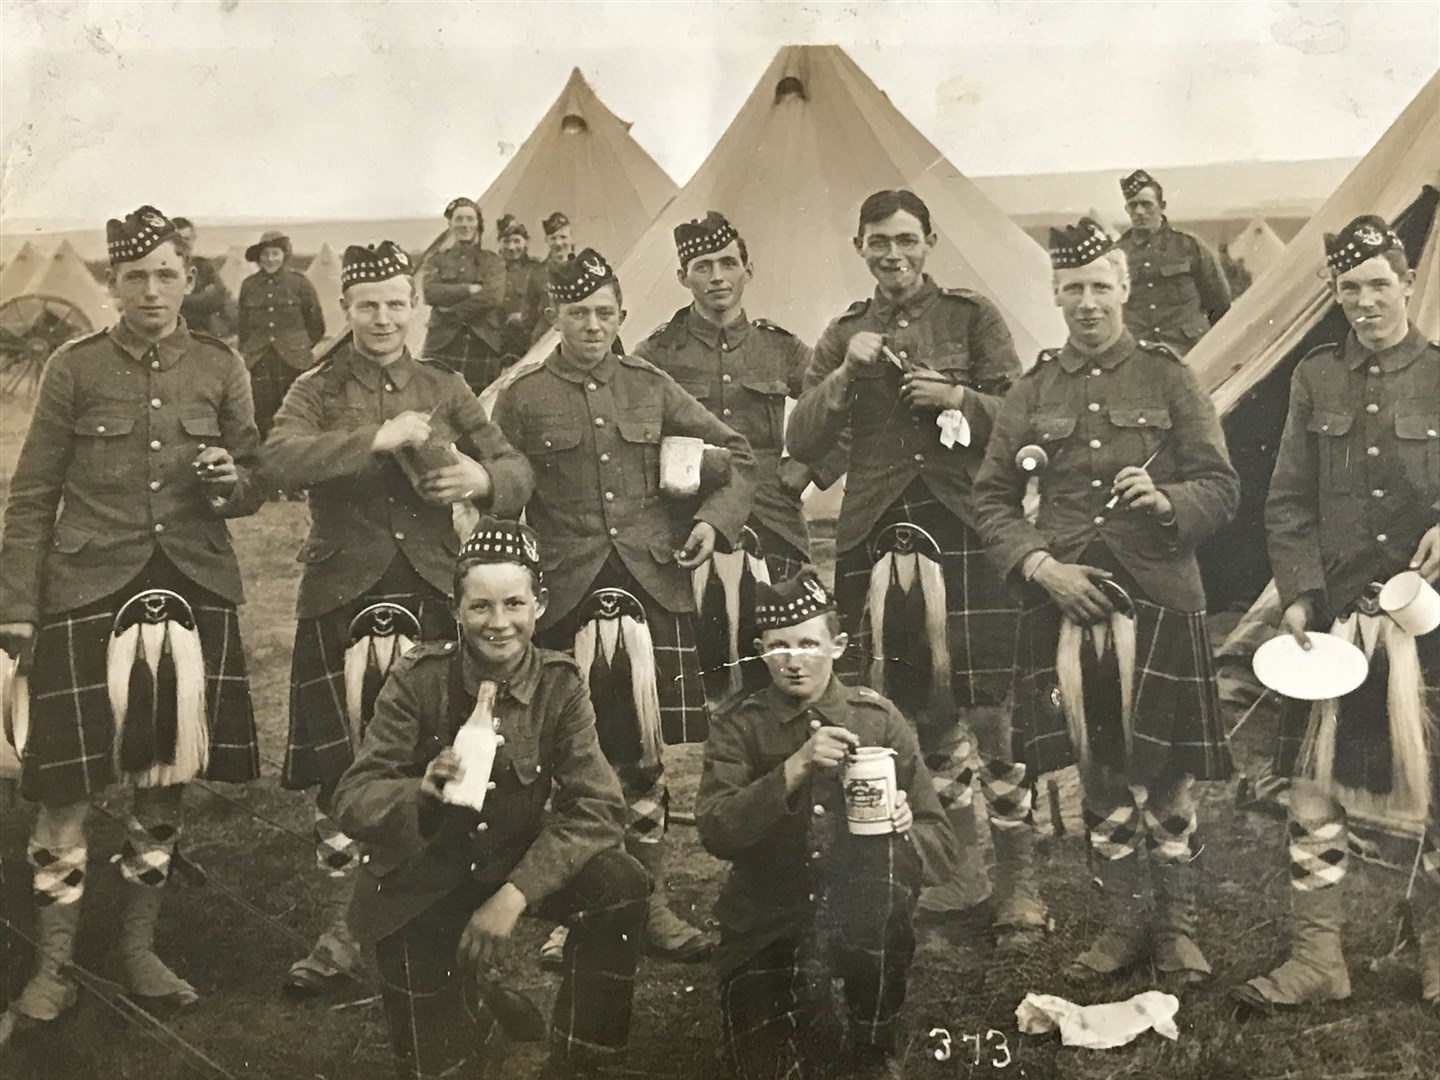 Joseph French (front left) kneeling and holding a pint of milk.